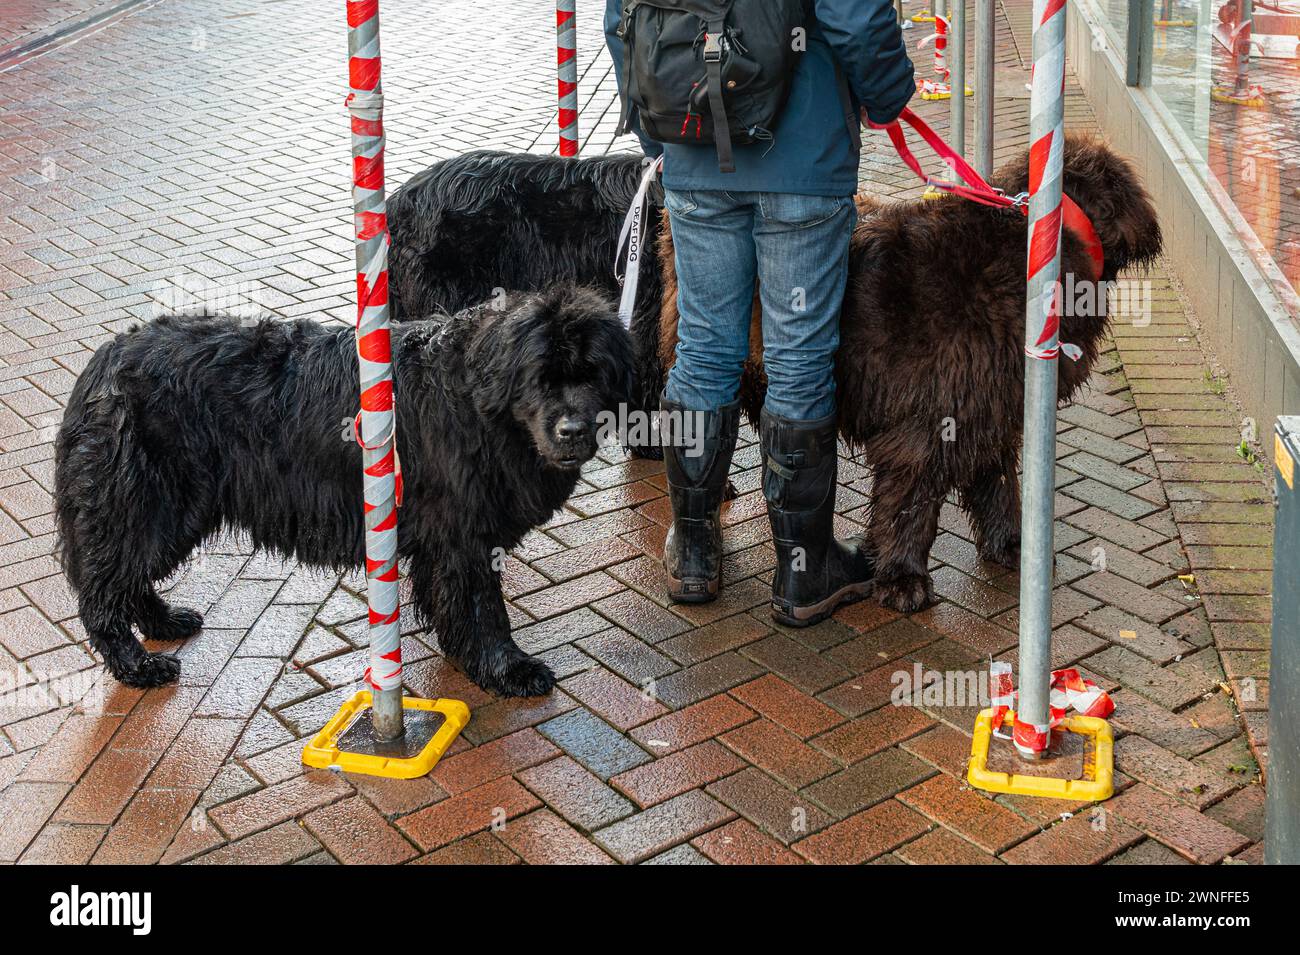 A man with  three Newfoundland dogs on leads in a town centre in wet rainy conditions. Stock Photo